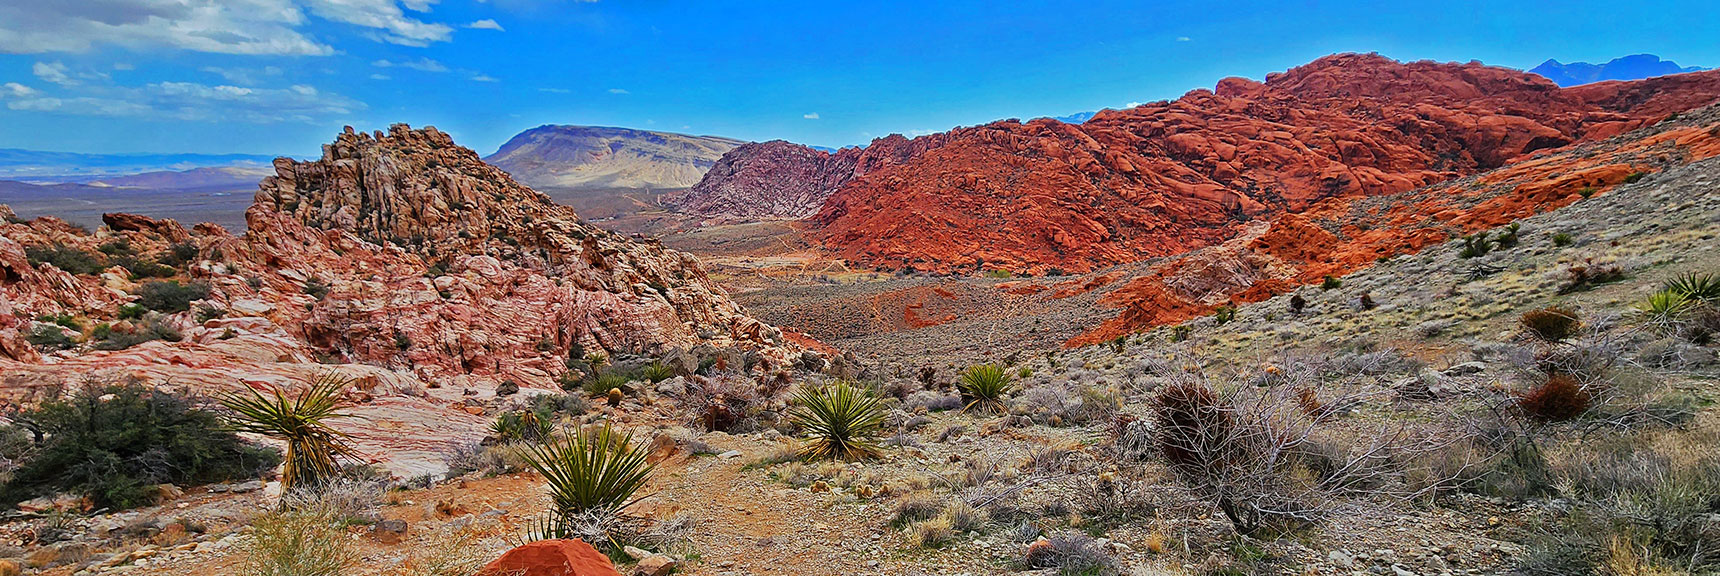 Another View to the Calico Hills and Blue Diamond Hill from Hell Hill Trail at Pink Goblin Pass | Ash Canyon to Calico Tanks | Calico Basin and Red Rock Canyon, Nevada | David Smith | Las Vegas Area Trails